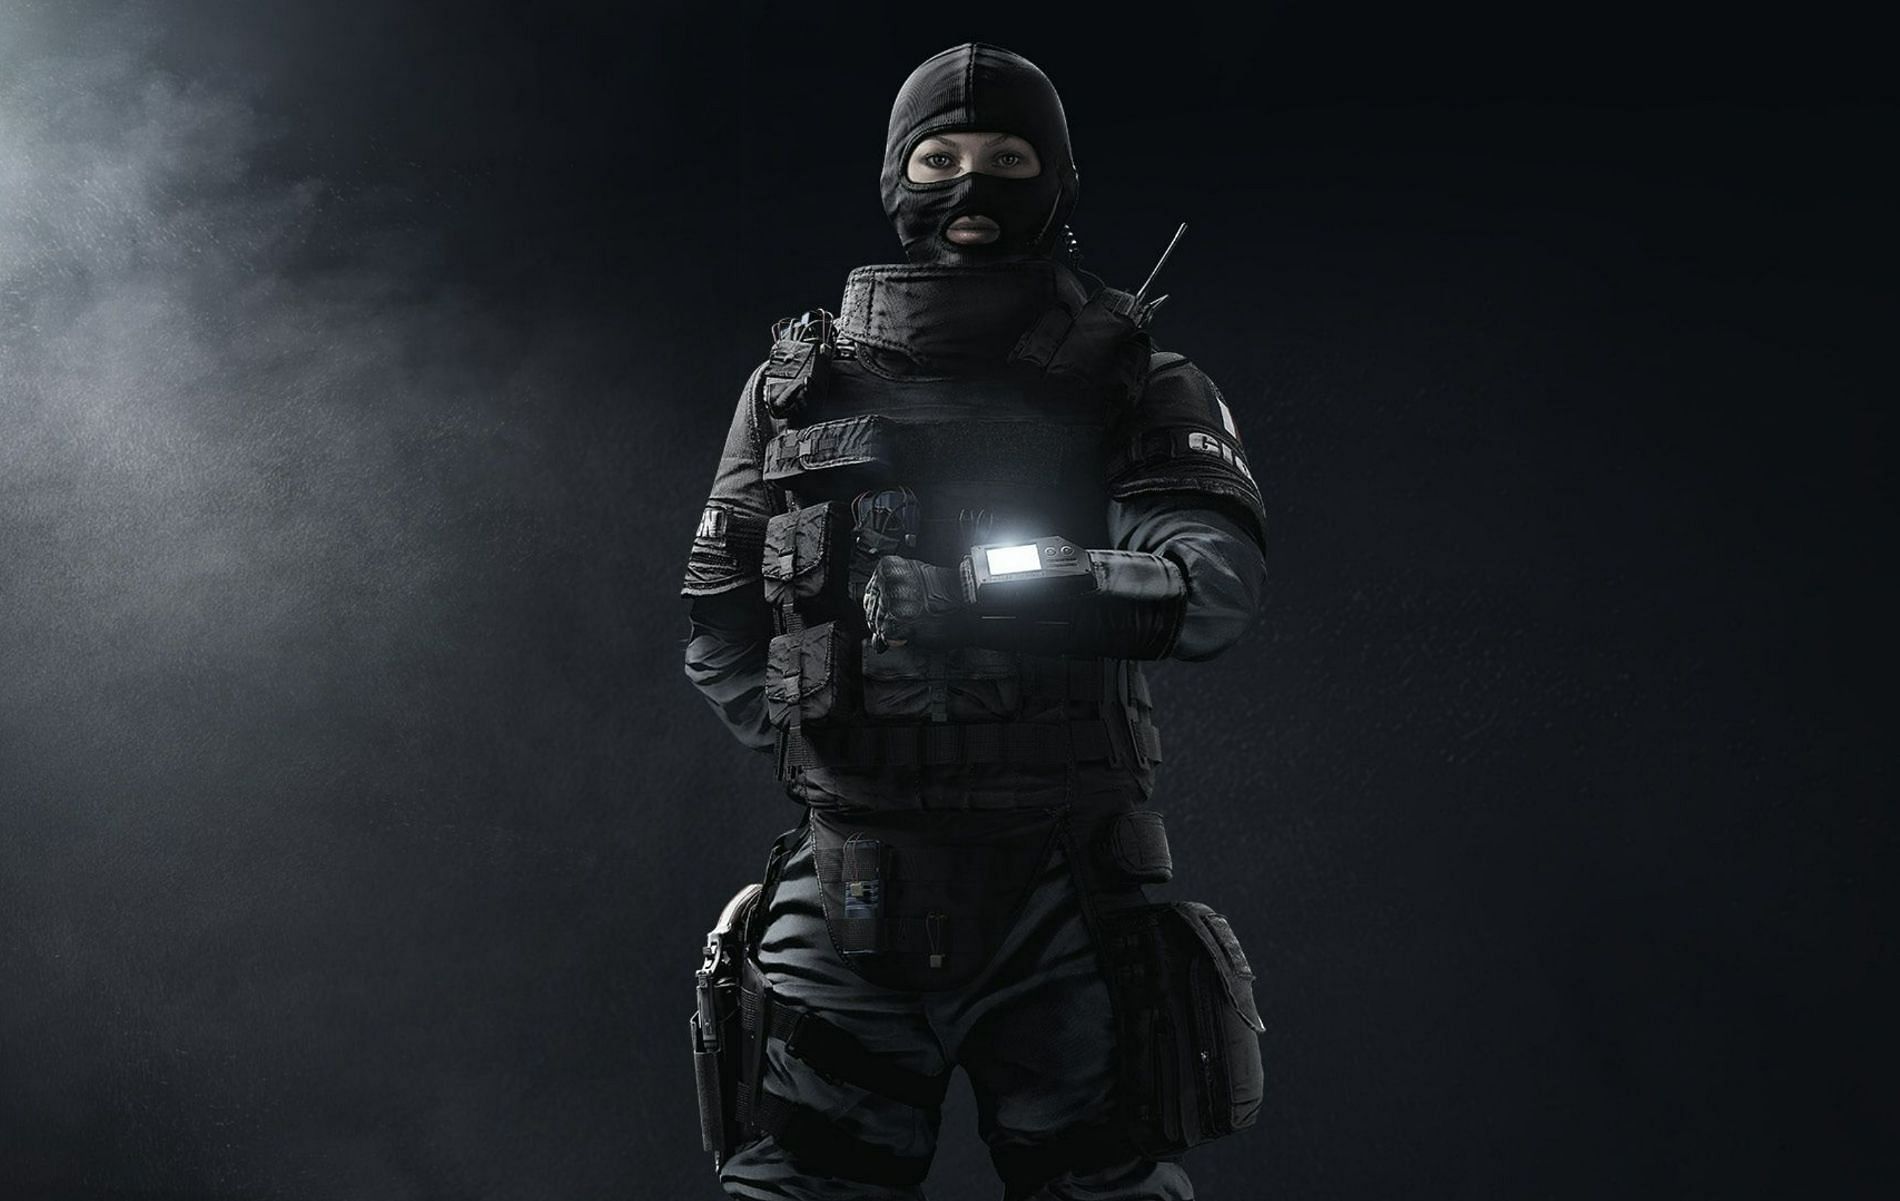 Rainbow Six Siege server downtime (January 18): schedule for Y7S4.2 revealed